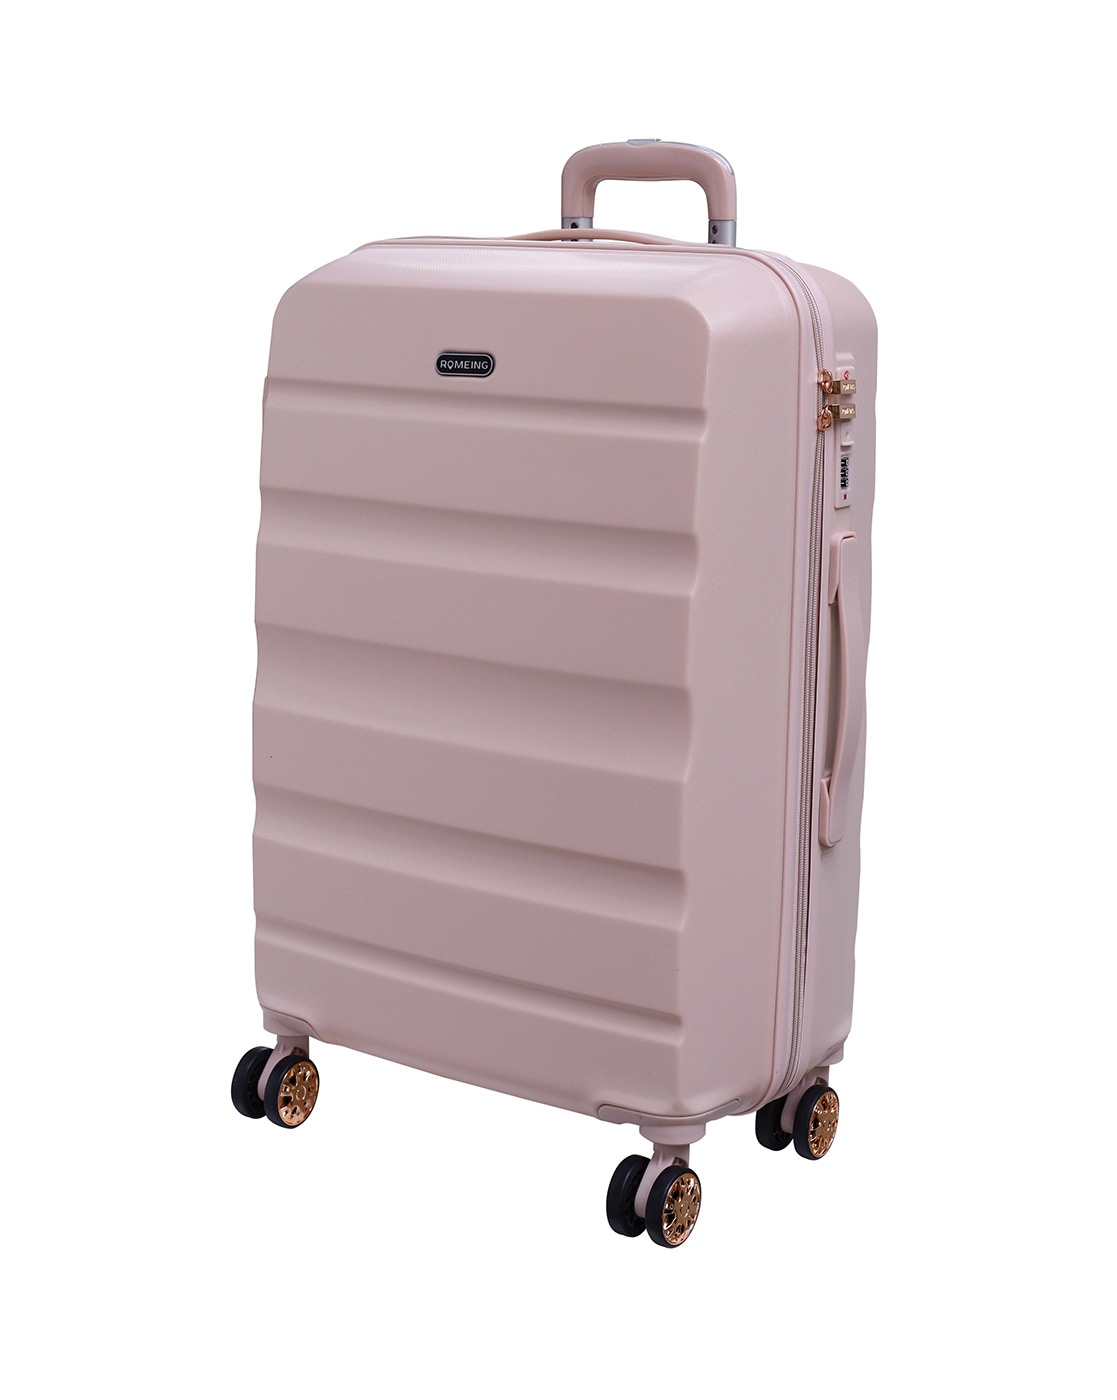 ROMEING Tuscany 20, 24 inch, Polypropylene Luggage Sky Blue 55 & 65 cms  Trolley Bag Cabin & Check-in Set - 24 inch Sky Blue - Price in India |  Flipkart.com